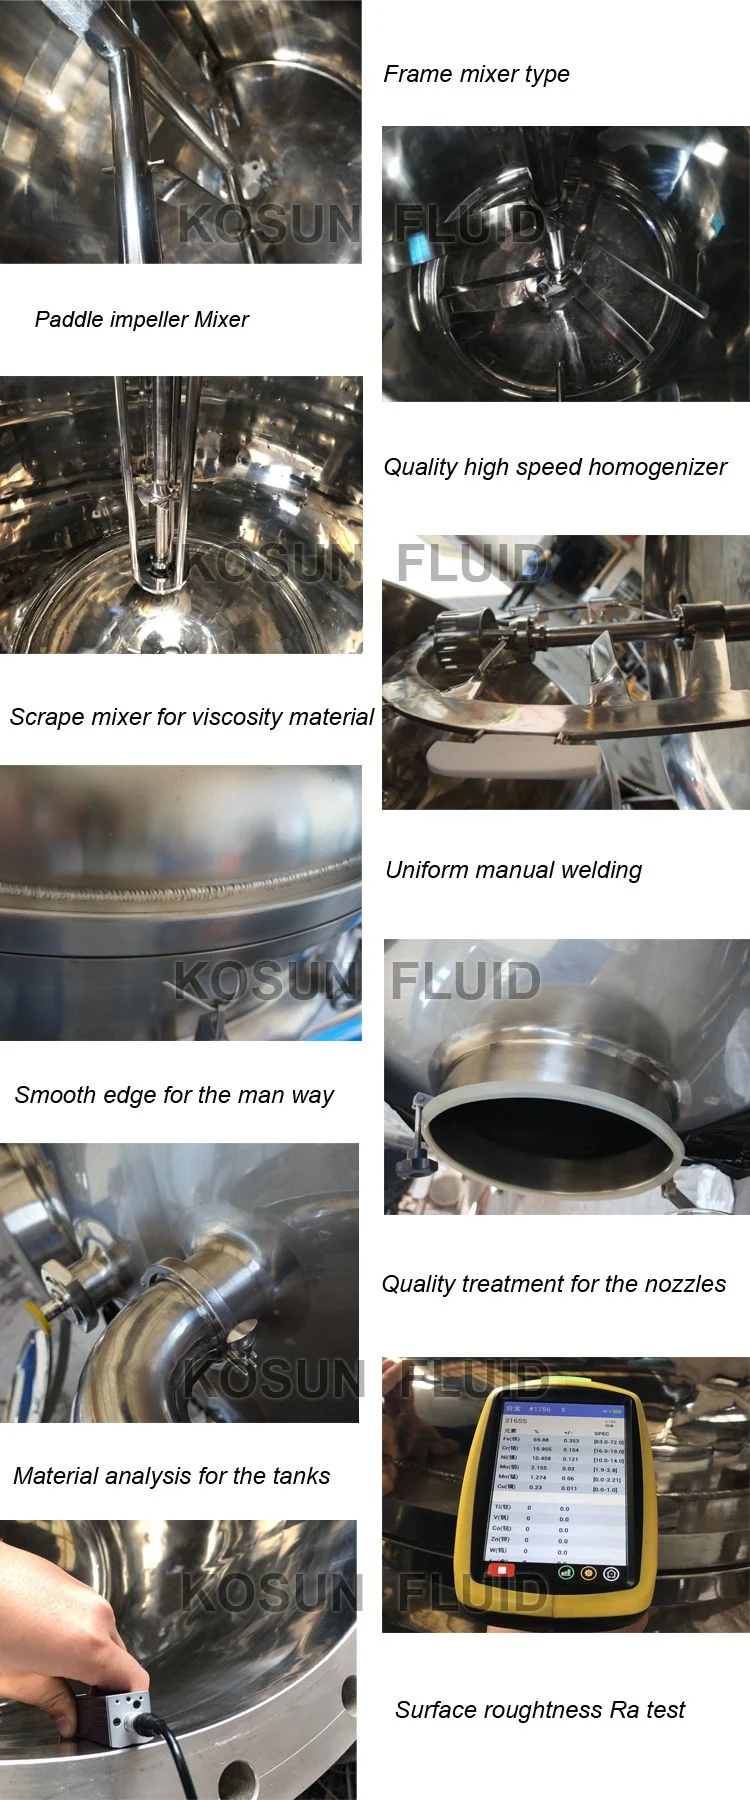 300 1000 Liter Food Grade Stainless Steel Industrial Electric Steam Oil Cooking Jacket Kettle / Cooker / Pot